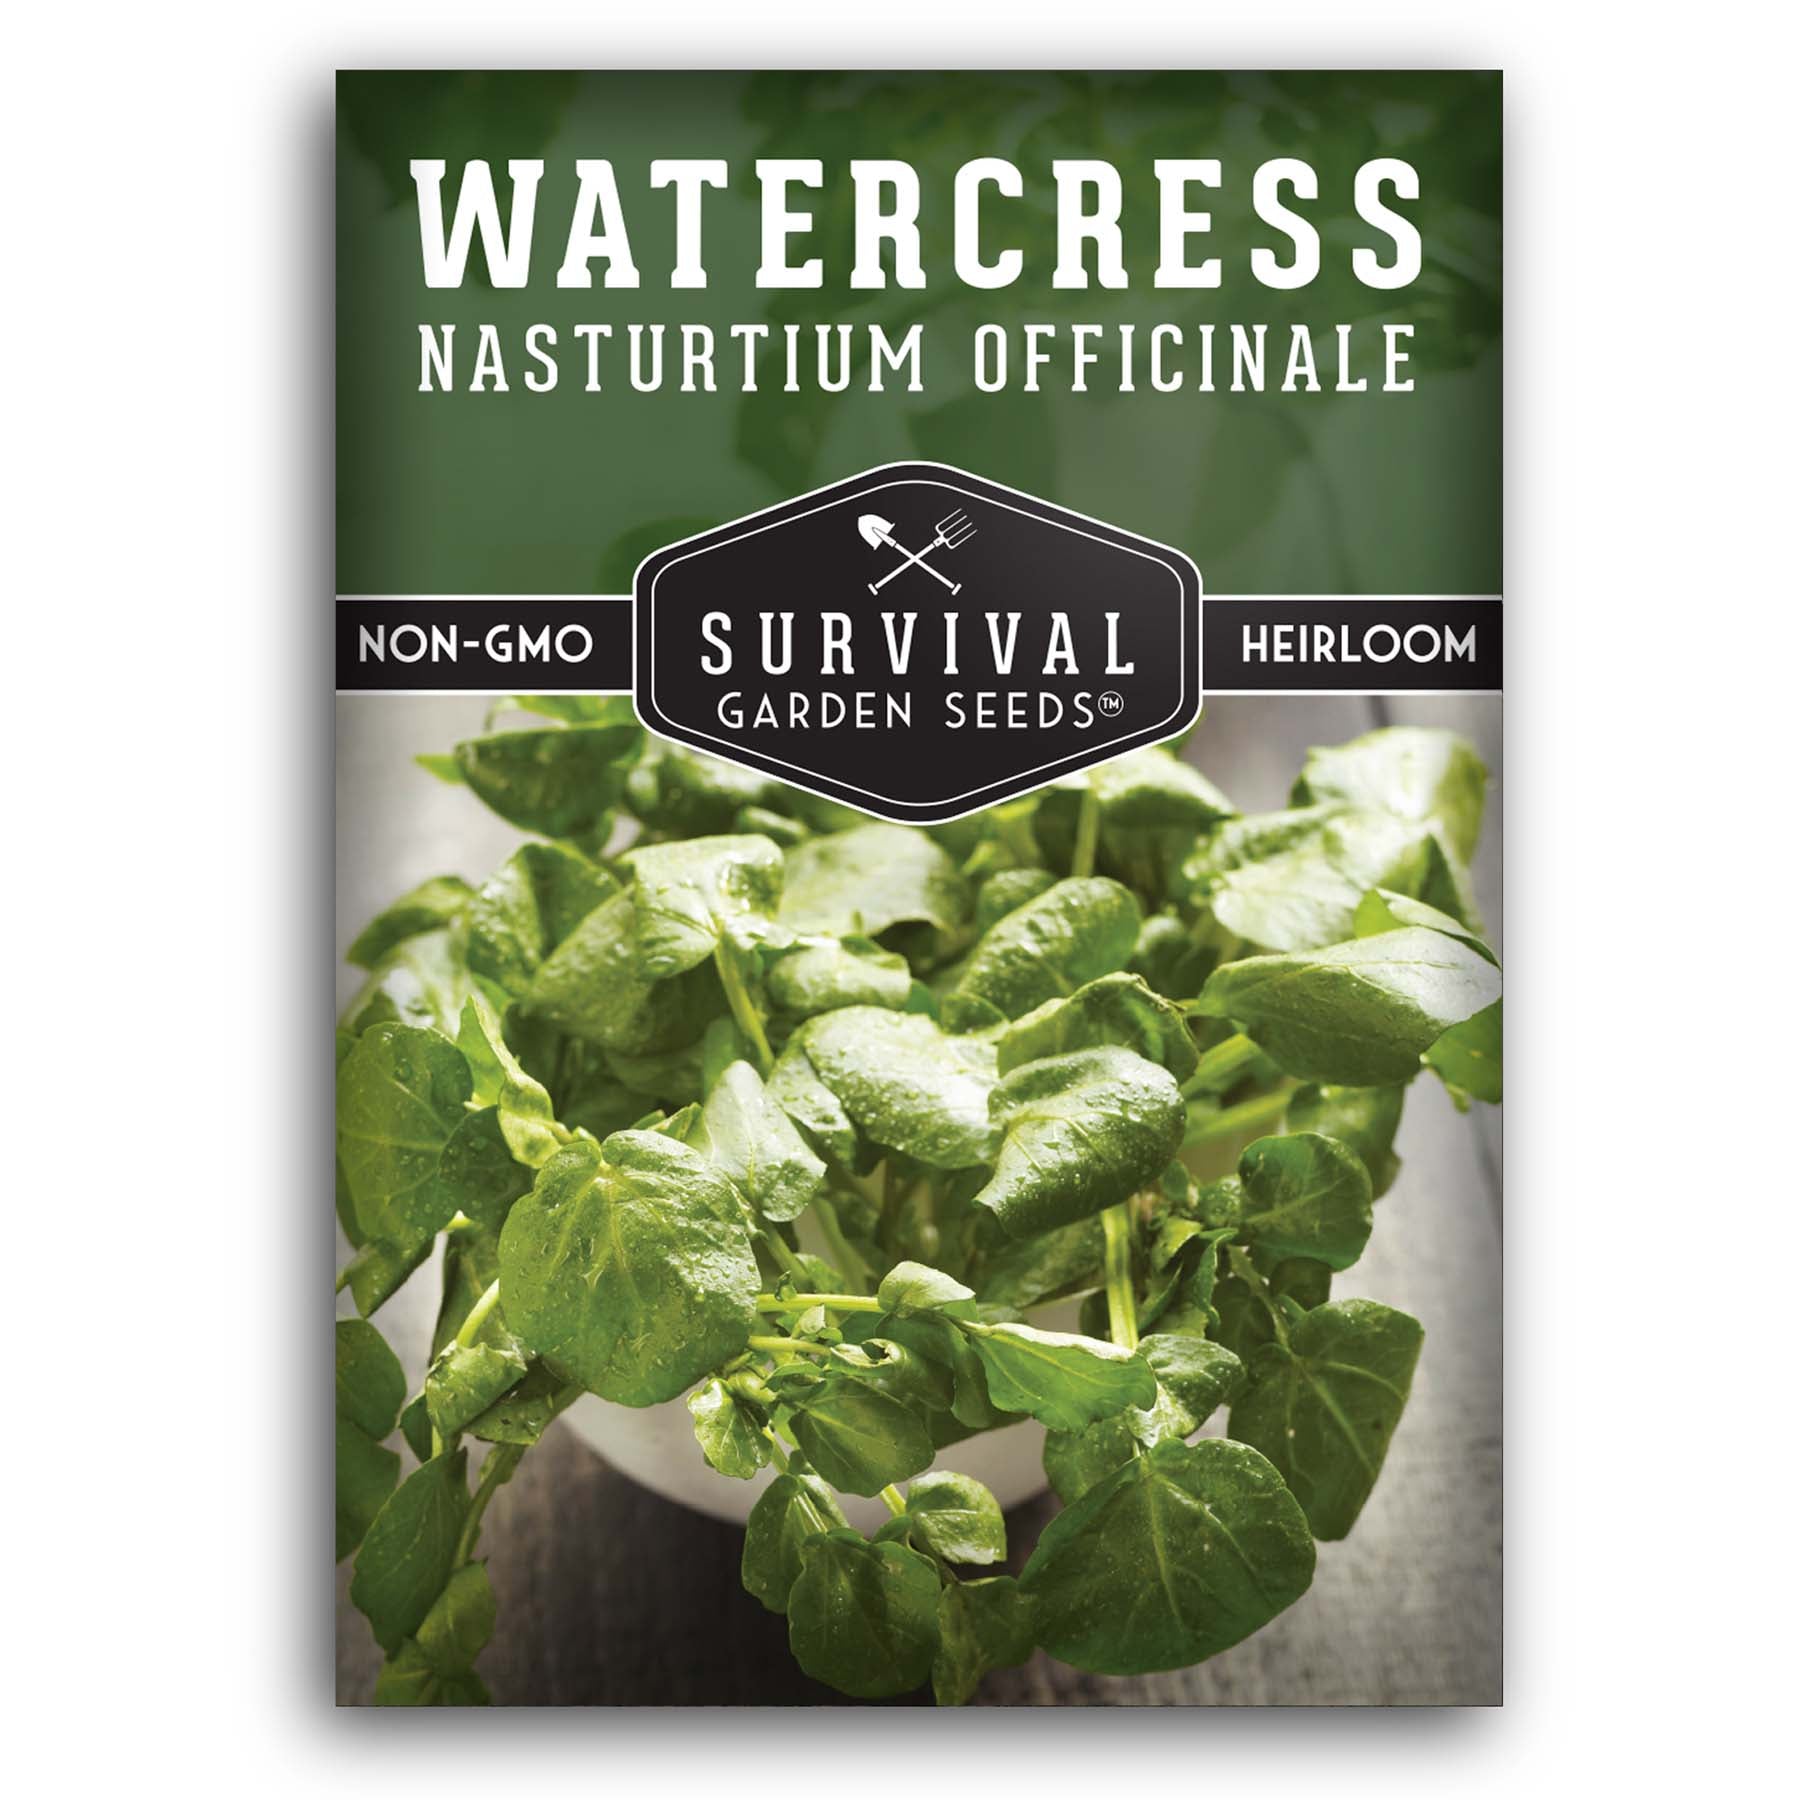 Watercress seeds for planting